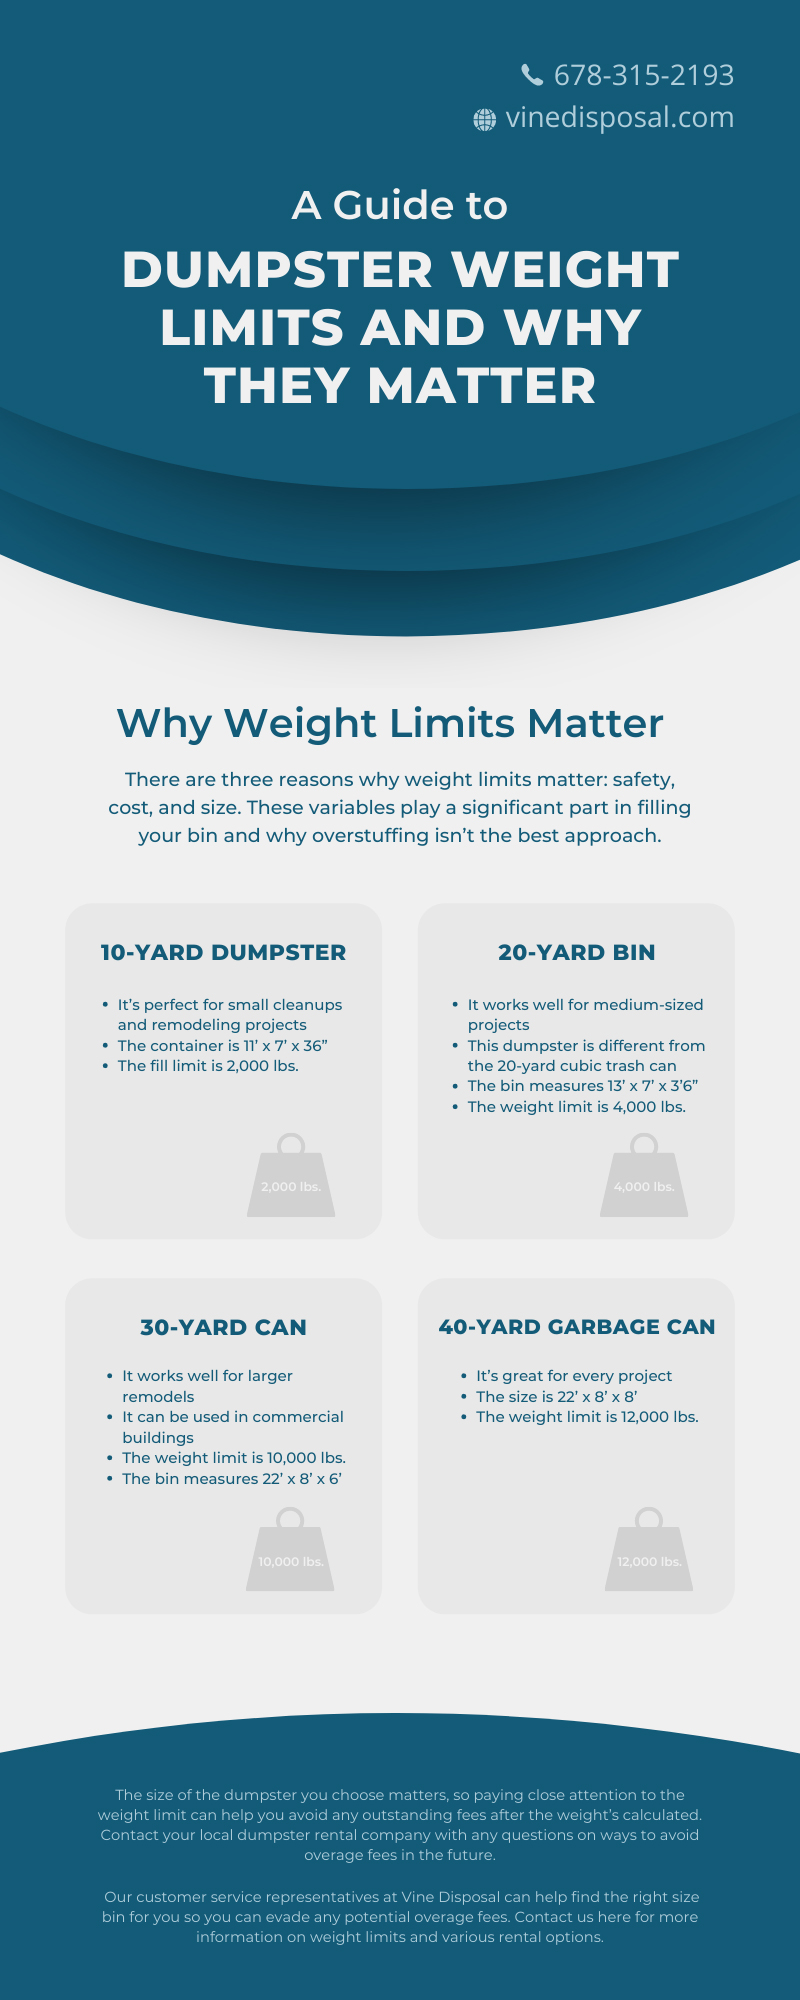 A Guide to Dumpster Weight Limits and Why They Matter